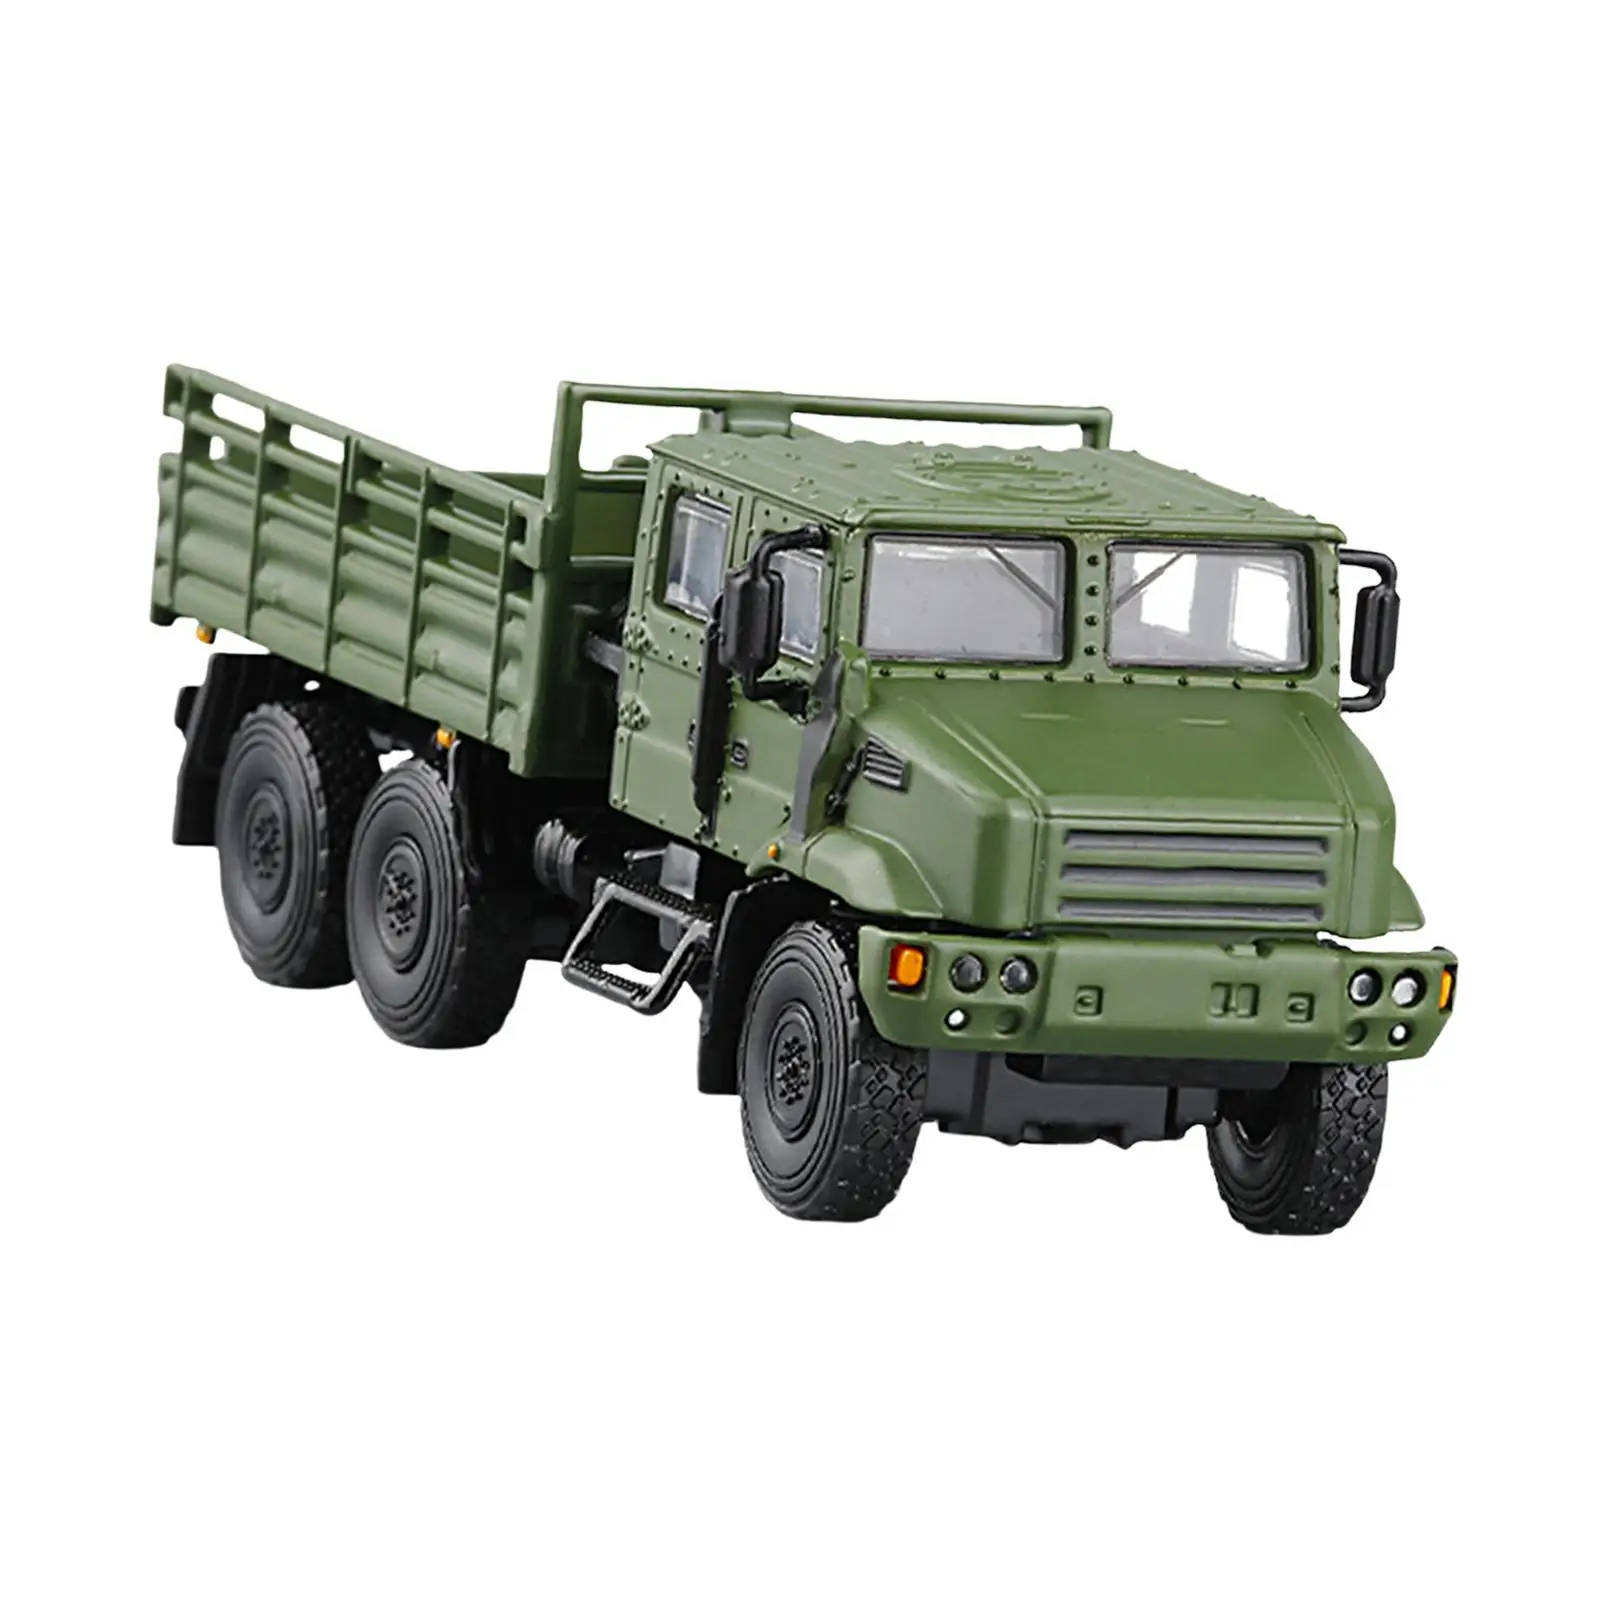 

1:64 Classic Transport Vehicle 6 Wheel Party Favors Alloy Diecast Car Armored Car for Adults Children Toddlers Kids Gifts